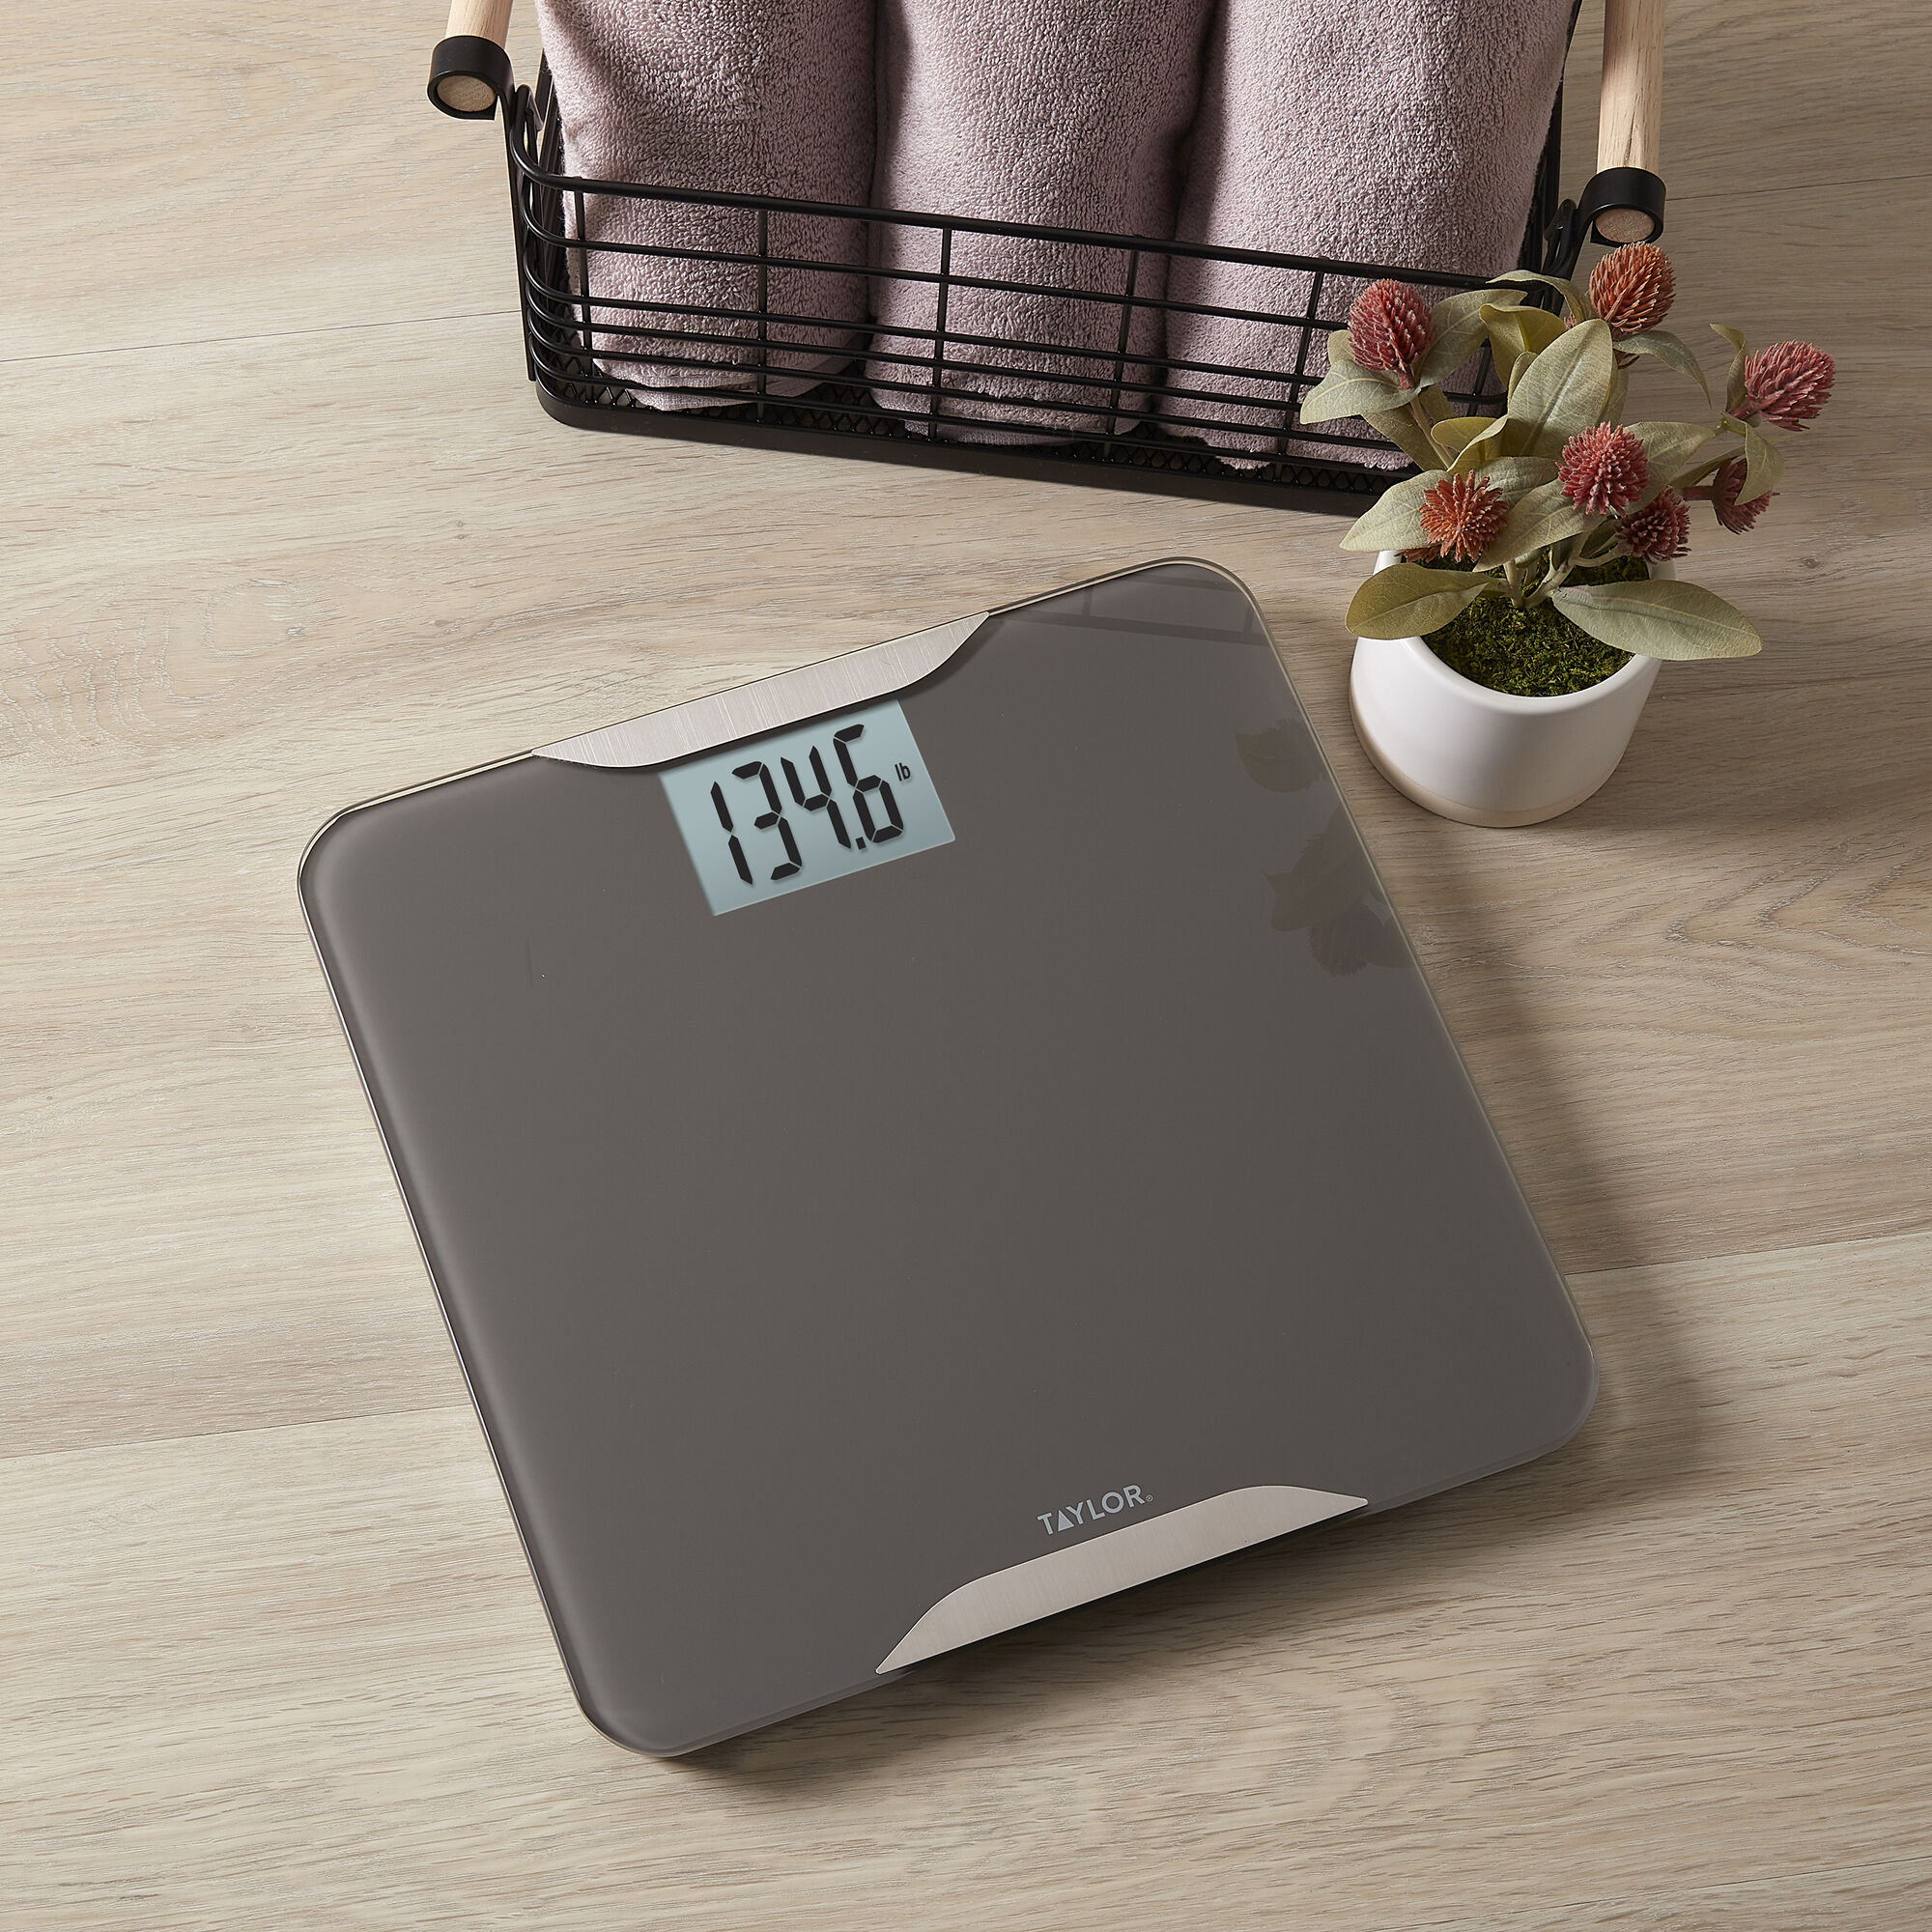  Taylor Digital Glass Bathroom Scale for Body Weight, 400 lb  Capacity, Durable Tempered Glass Platform and Easy to Read, White : Health  & Household